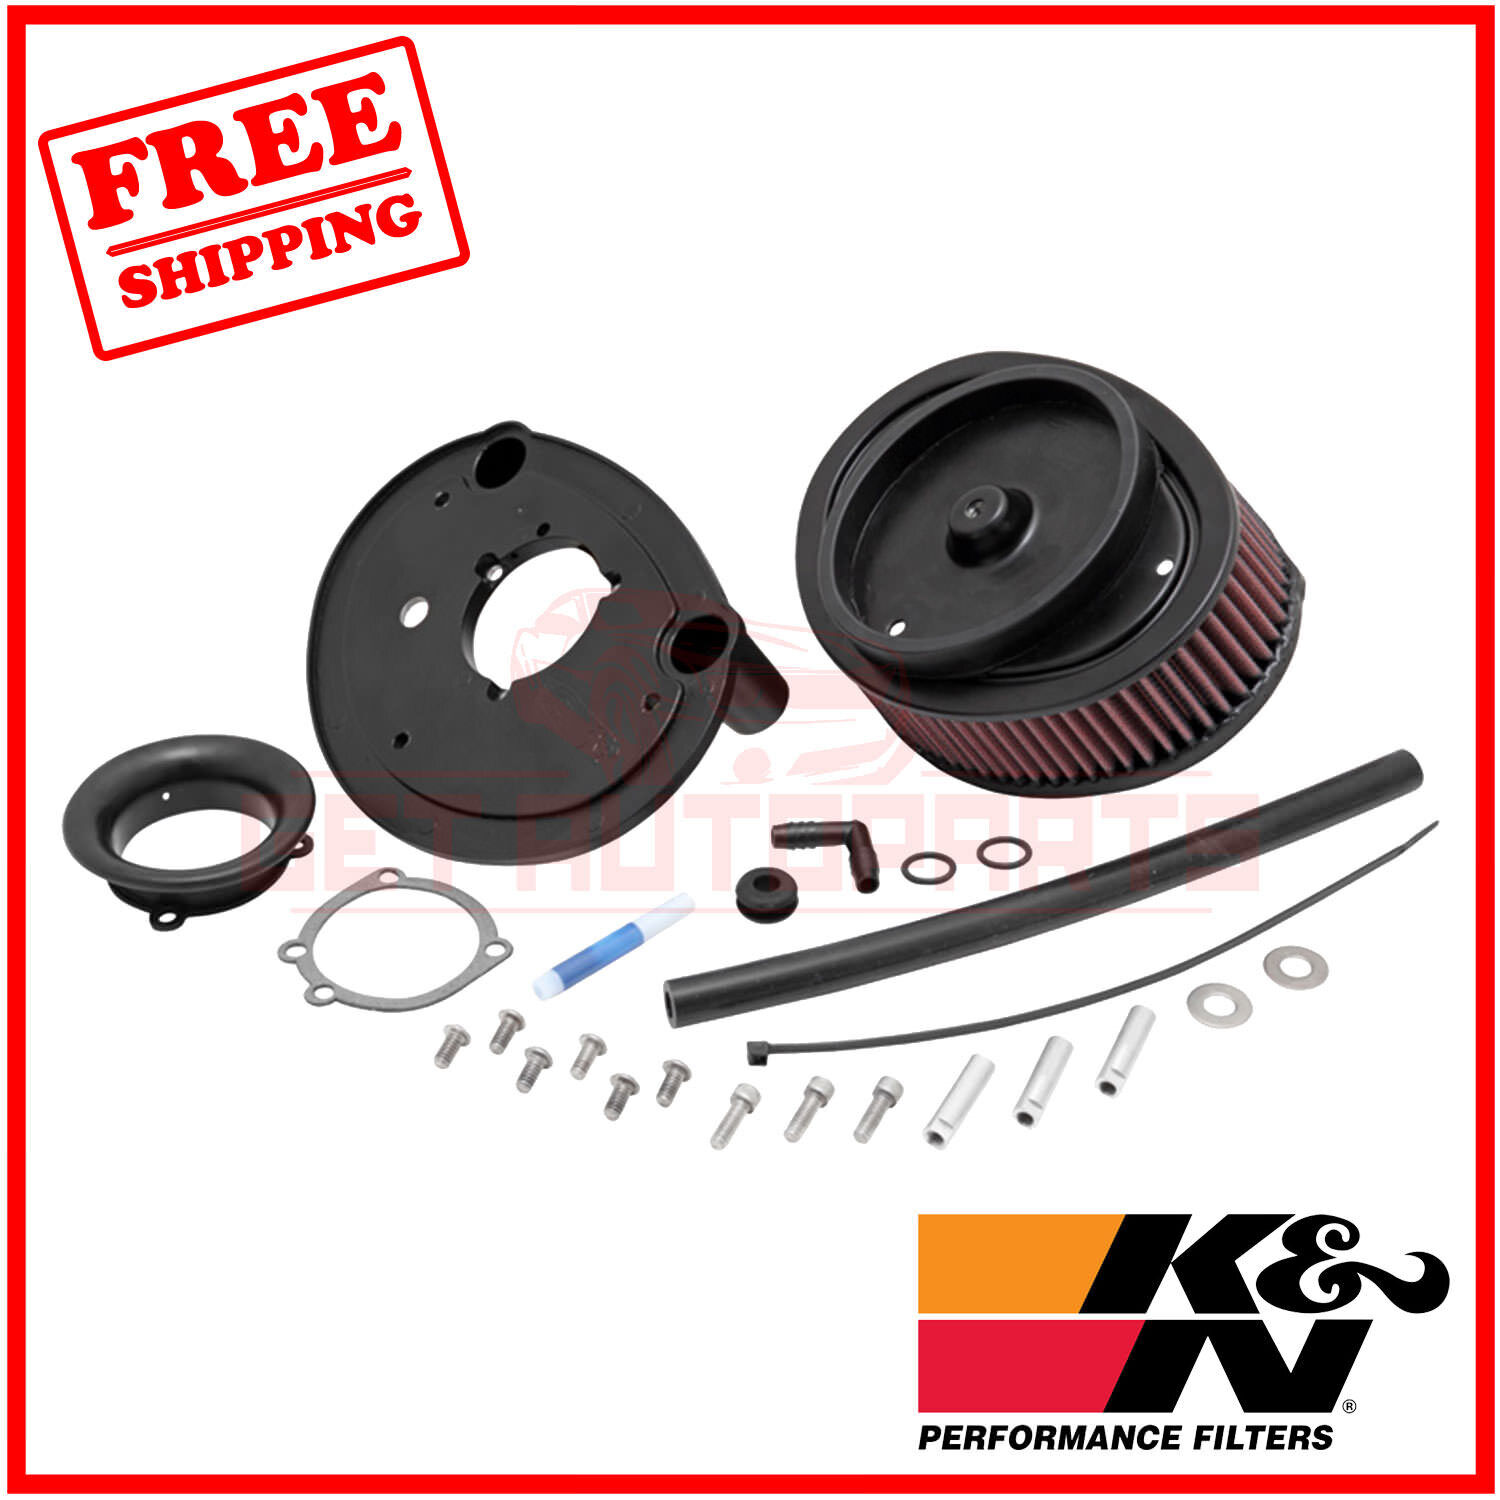 K&N Intake System fits with Harley Davidson FLHTC Electra Glide Classic 20